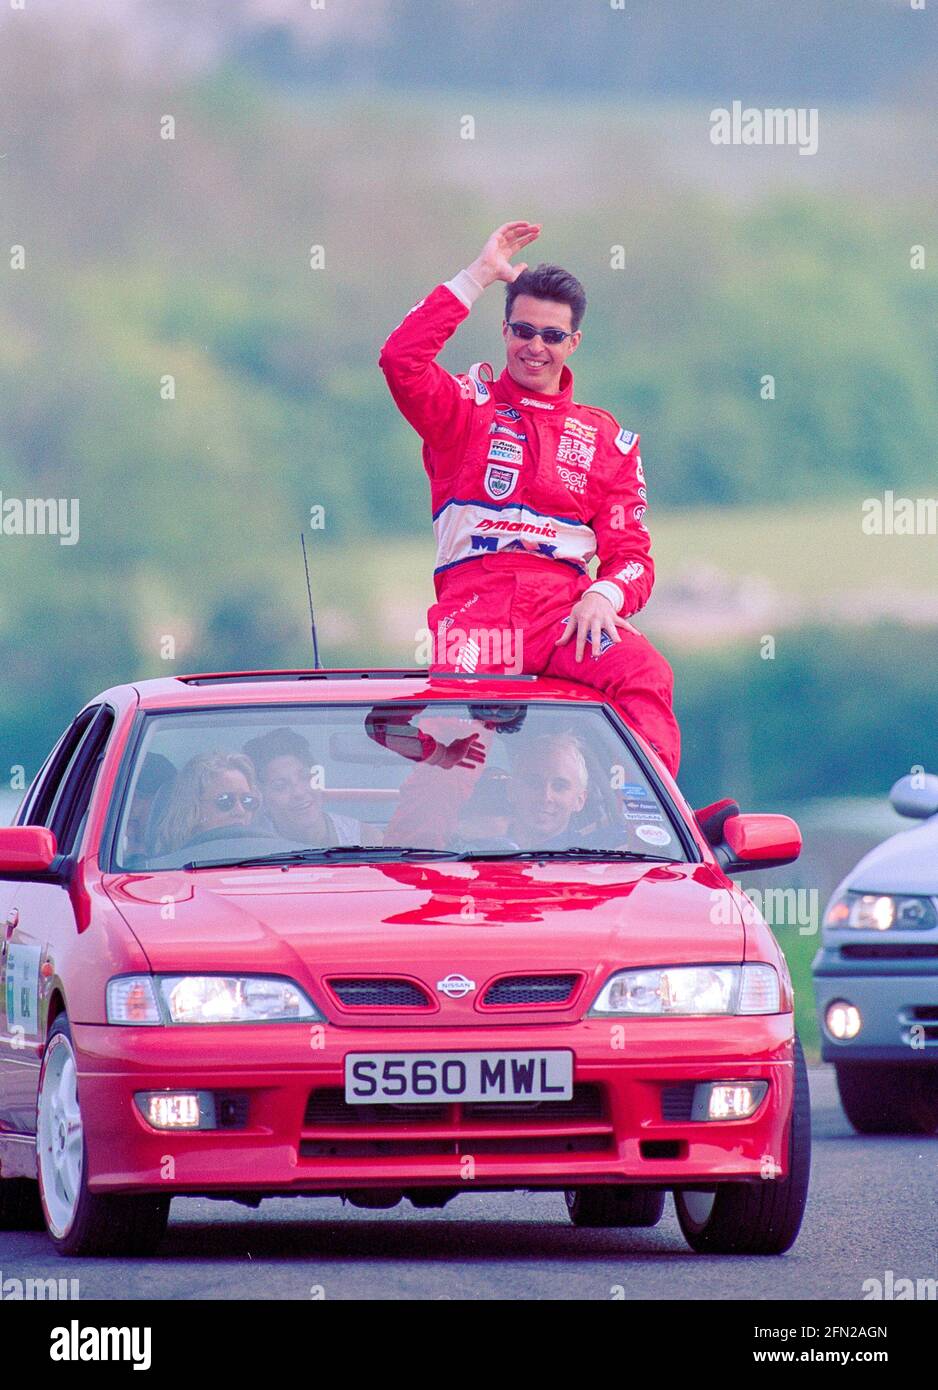 Matt Neal waving to the crowds Sat on top of a car on the parade lap of the British Touring Car Championship of 1999 at Thruxton Circuit England. Stock Photo